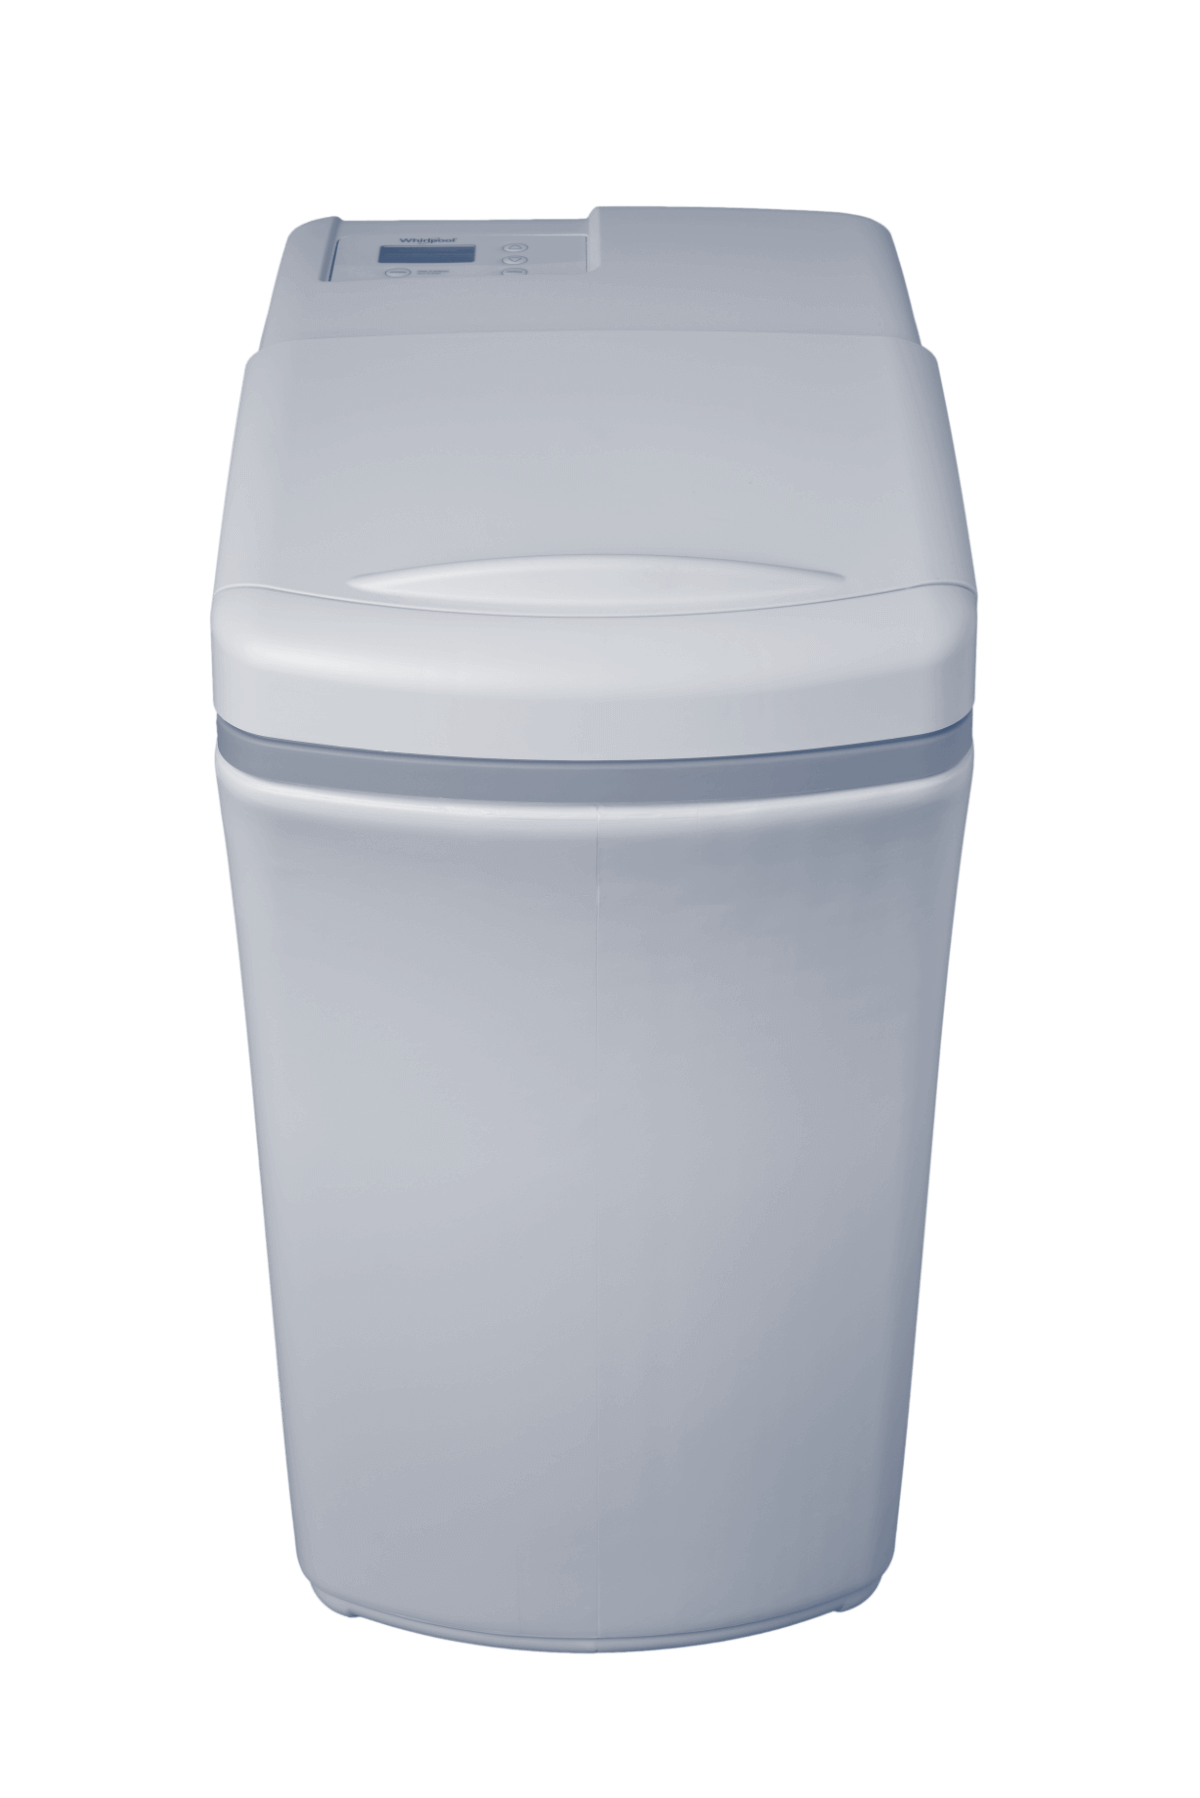 Whirlpool Compact Home Water Softener System | WHES18